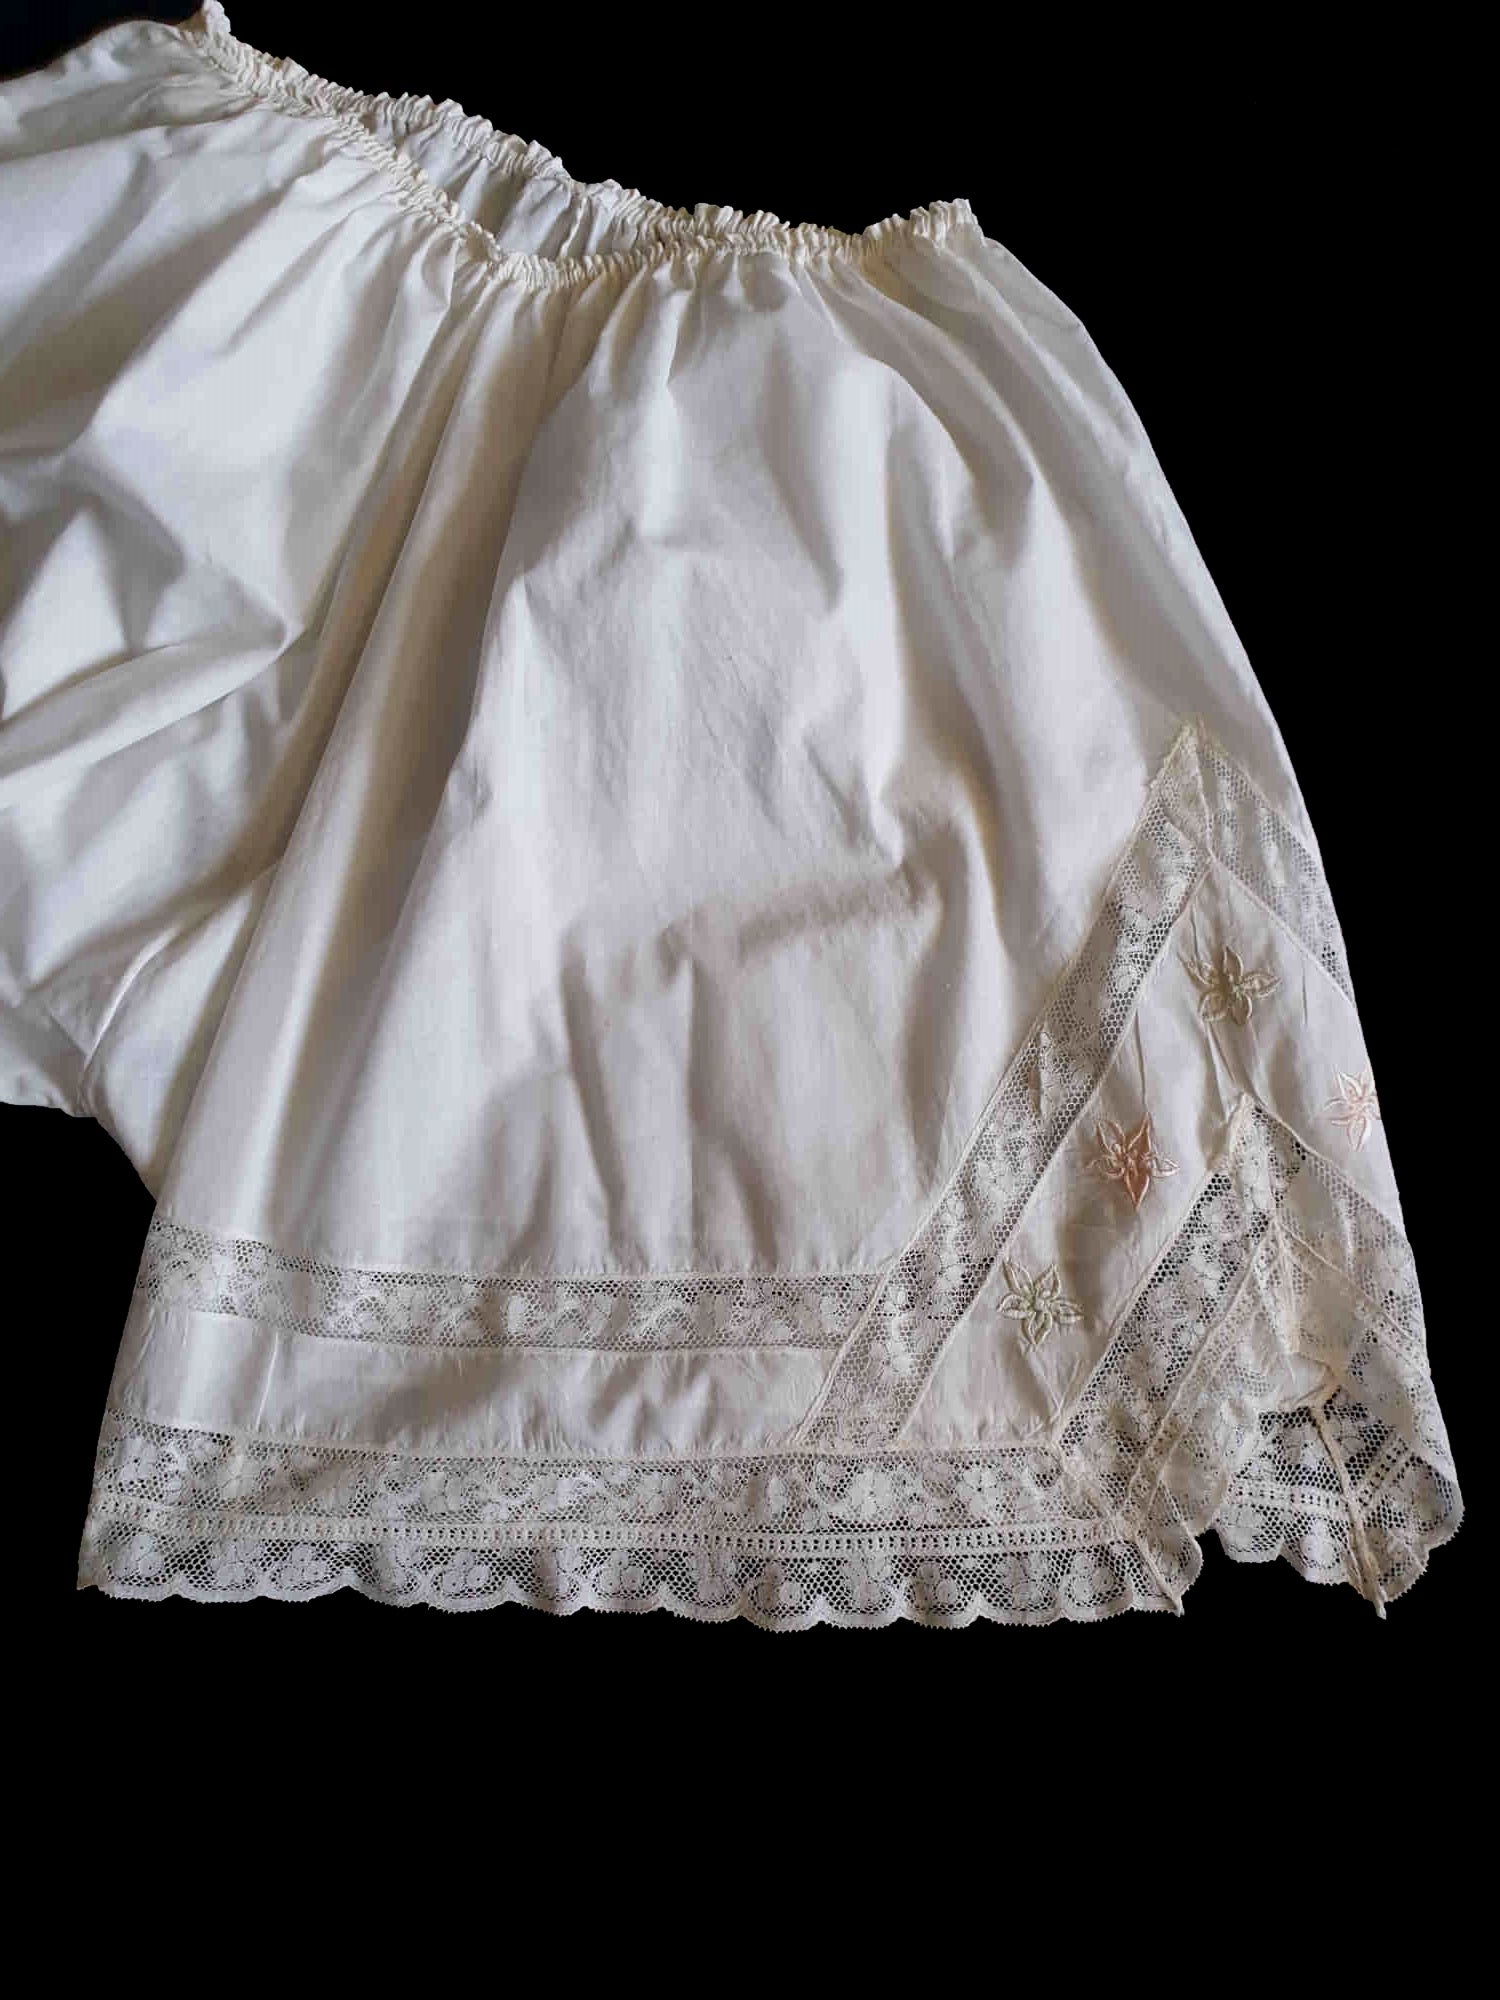 antique vintage wide leg bloomers with lace and embroidery Large